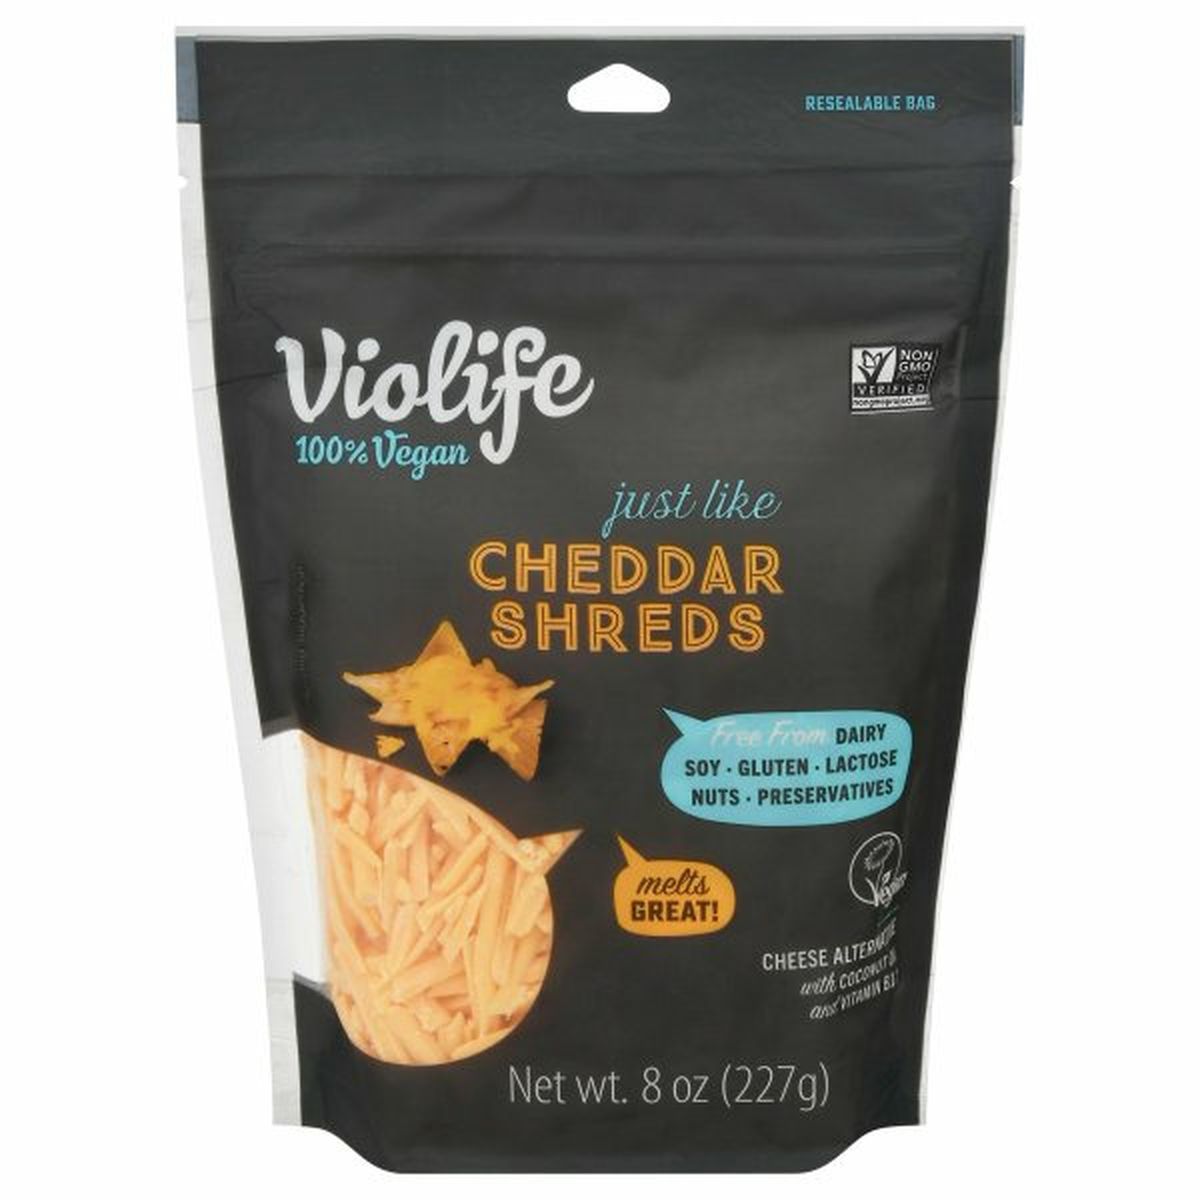 Calories in Violife Cheese Alternative, Cheddar Shreds